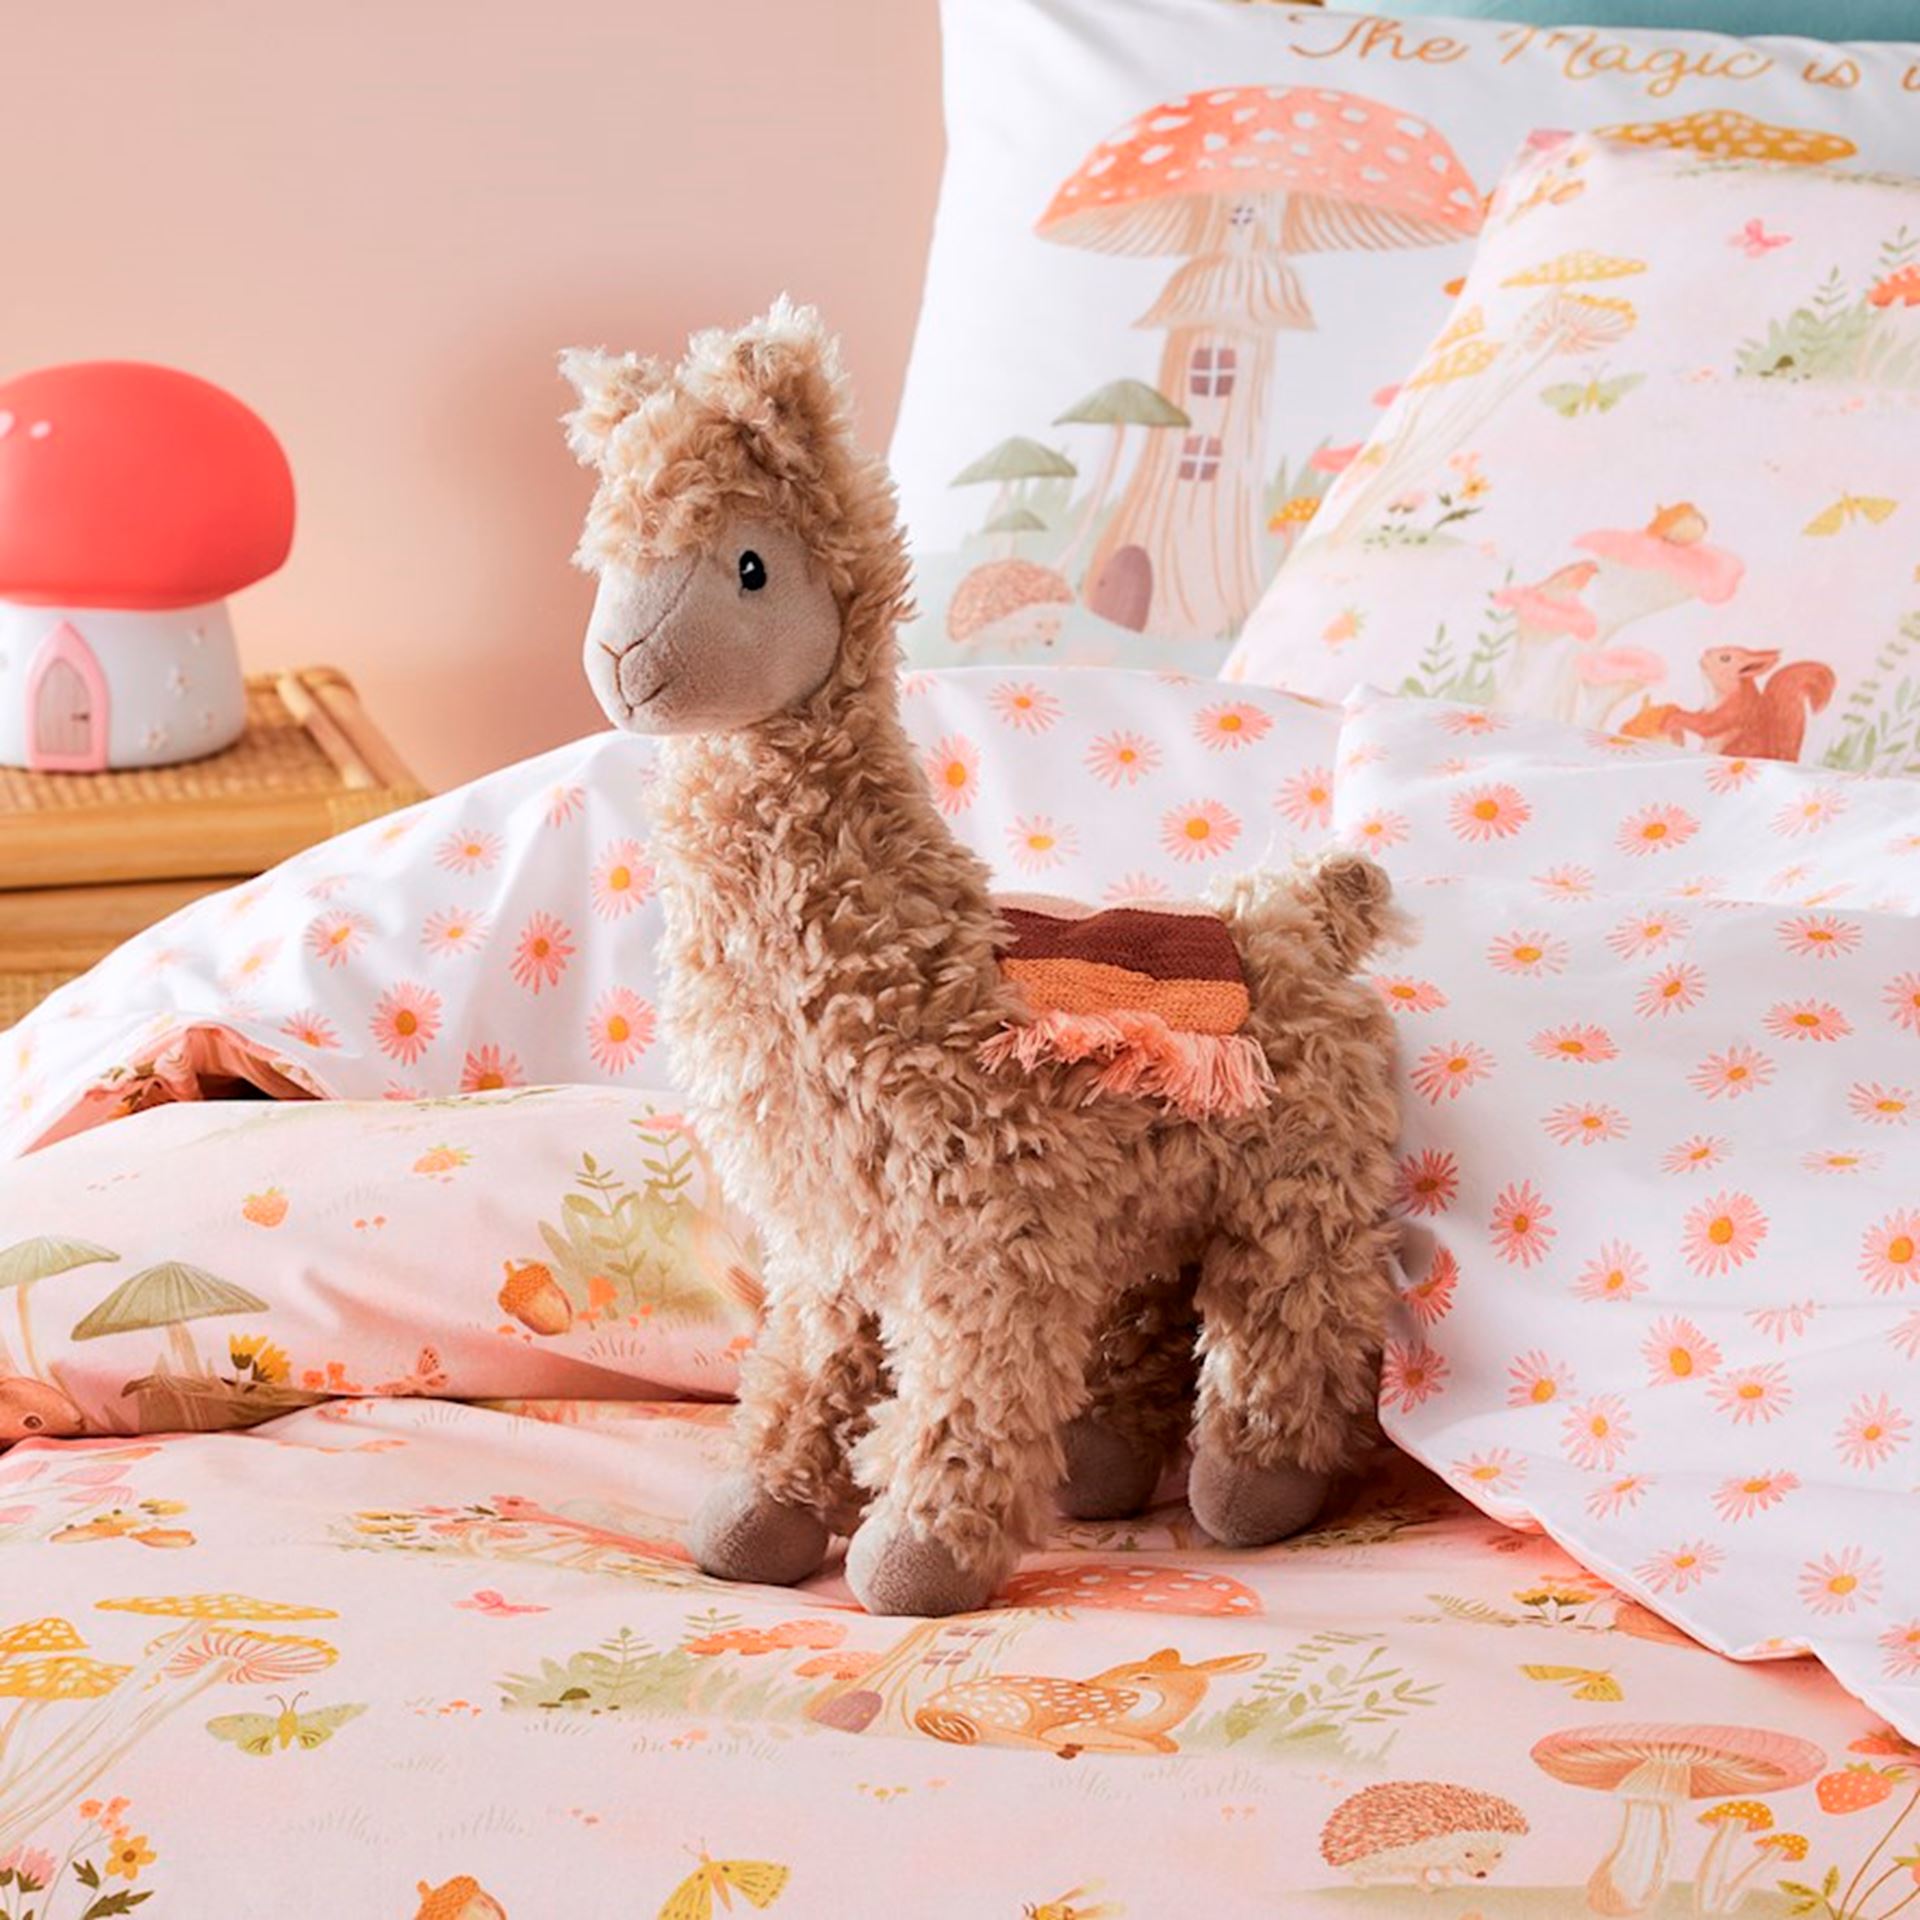 https://www.adairs.com.au/globalassets/13.-ecommerce/03.-product-images/2022_images/kids/kids-toys/plush-toys/42640_llama_zoom_1.jpg?width=1920&mode=crop&heightratio=1&quality=80